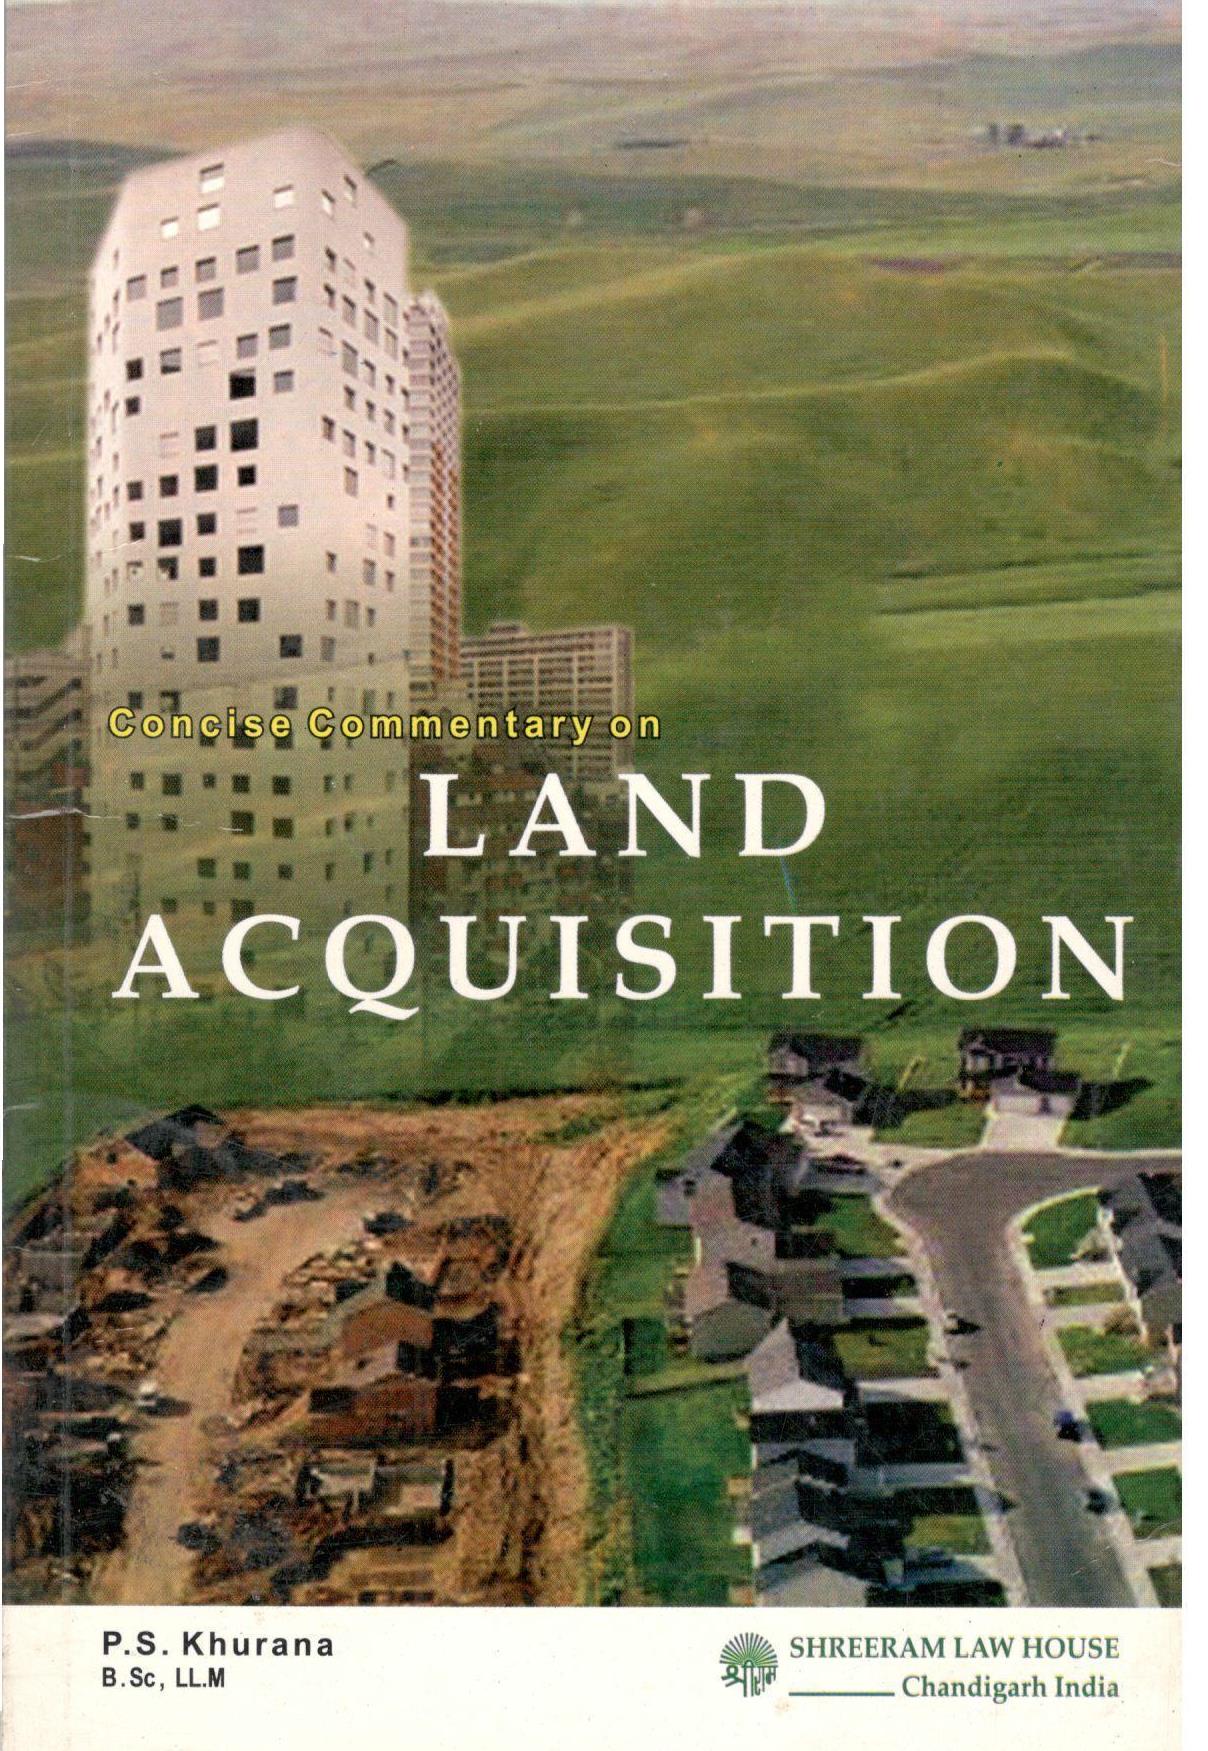 2011 Concise Commentary on Land Acquisition